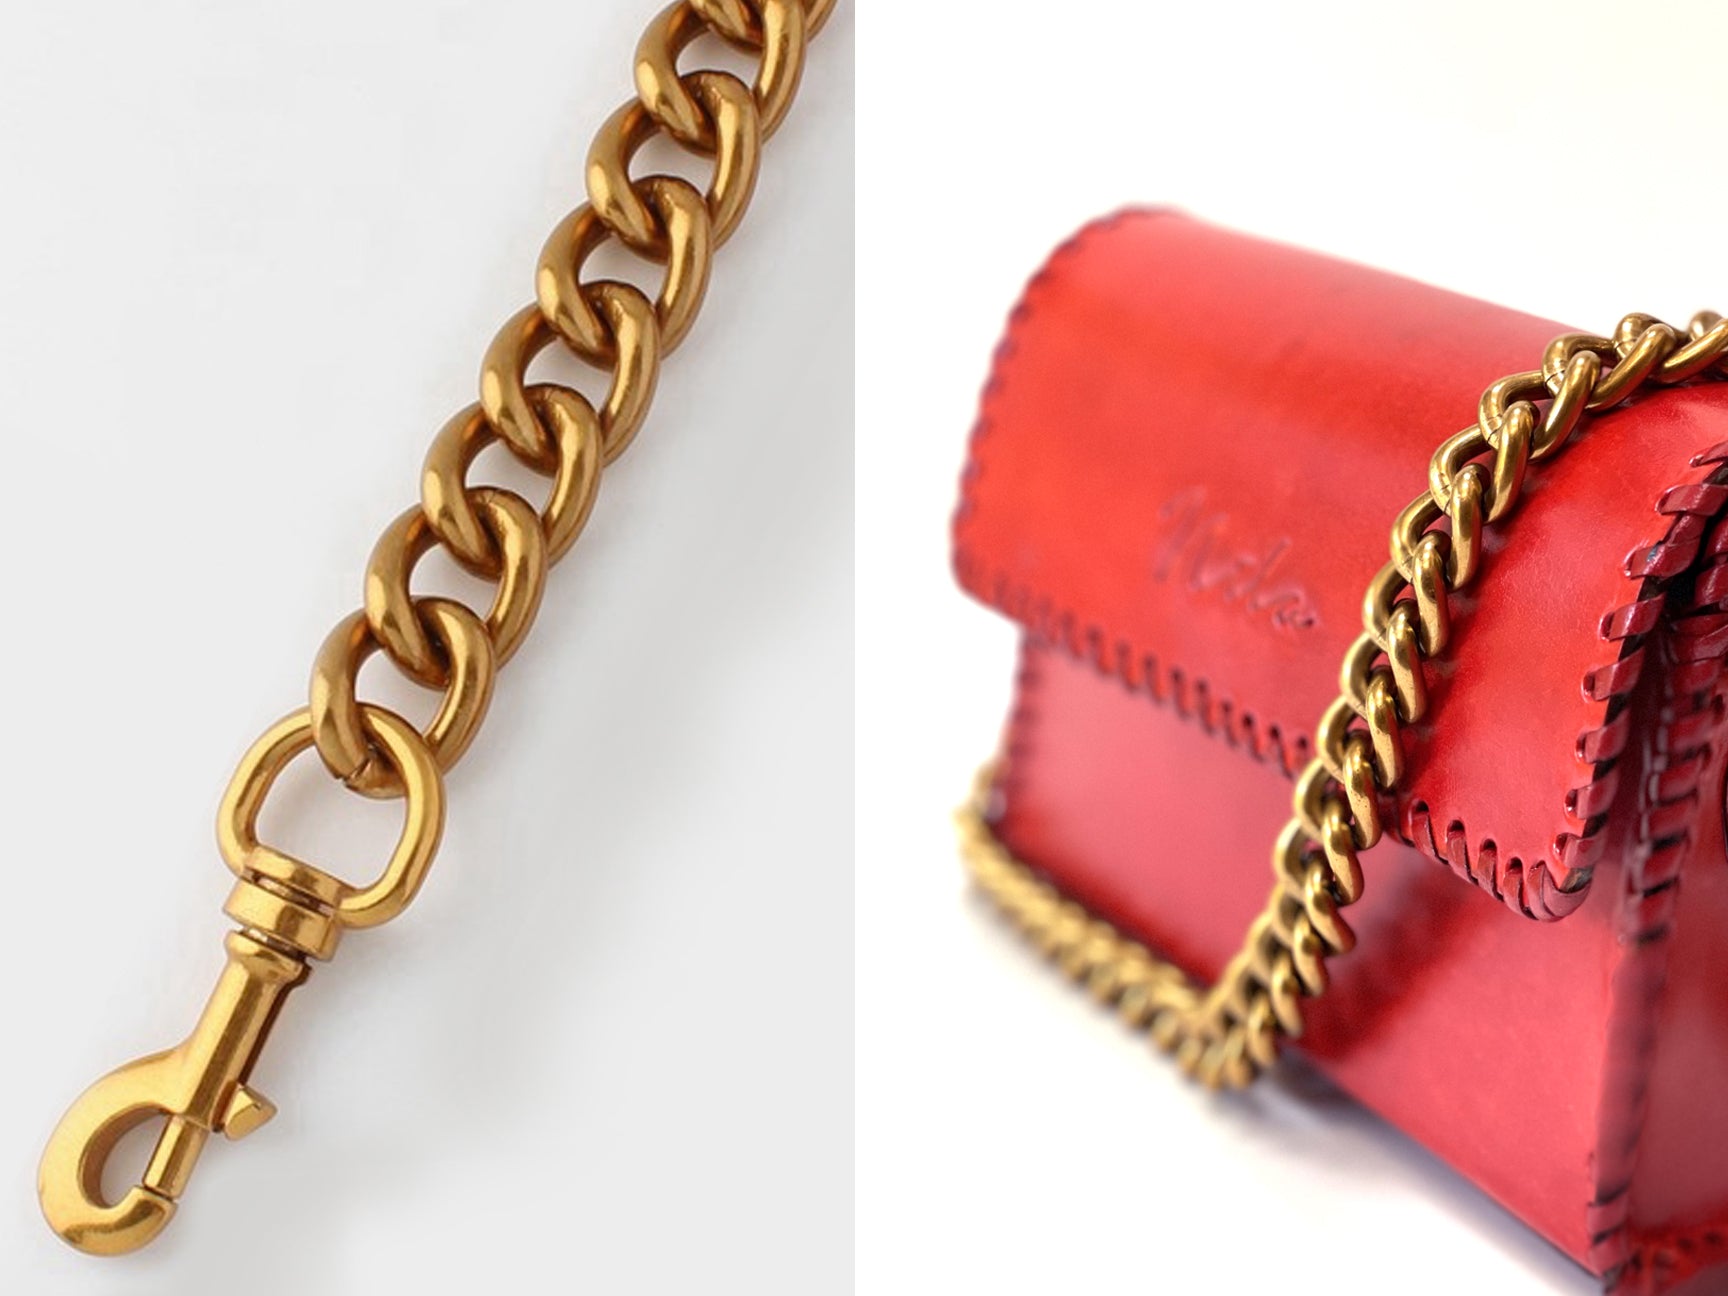 How to make old purse straps look new